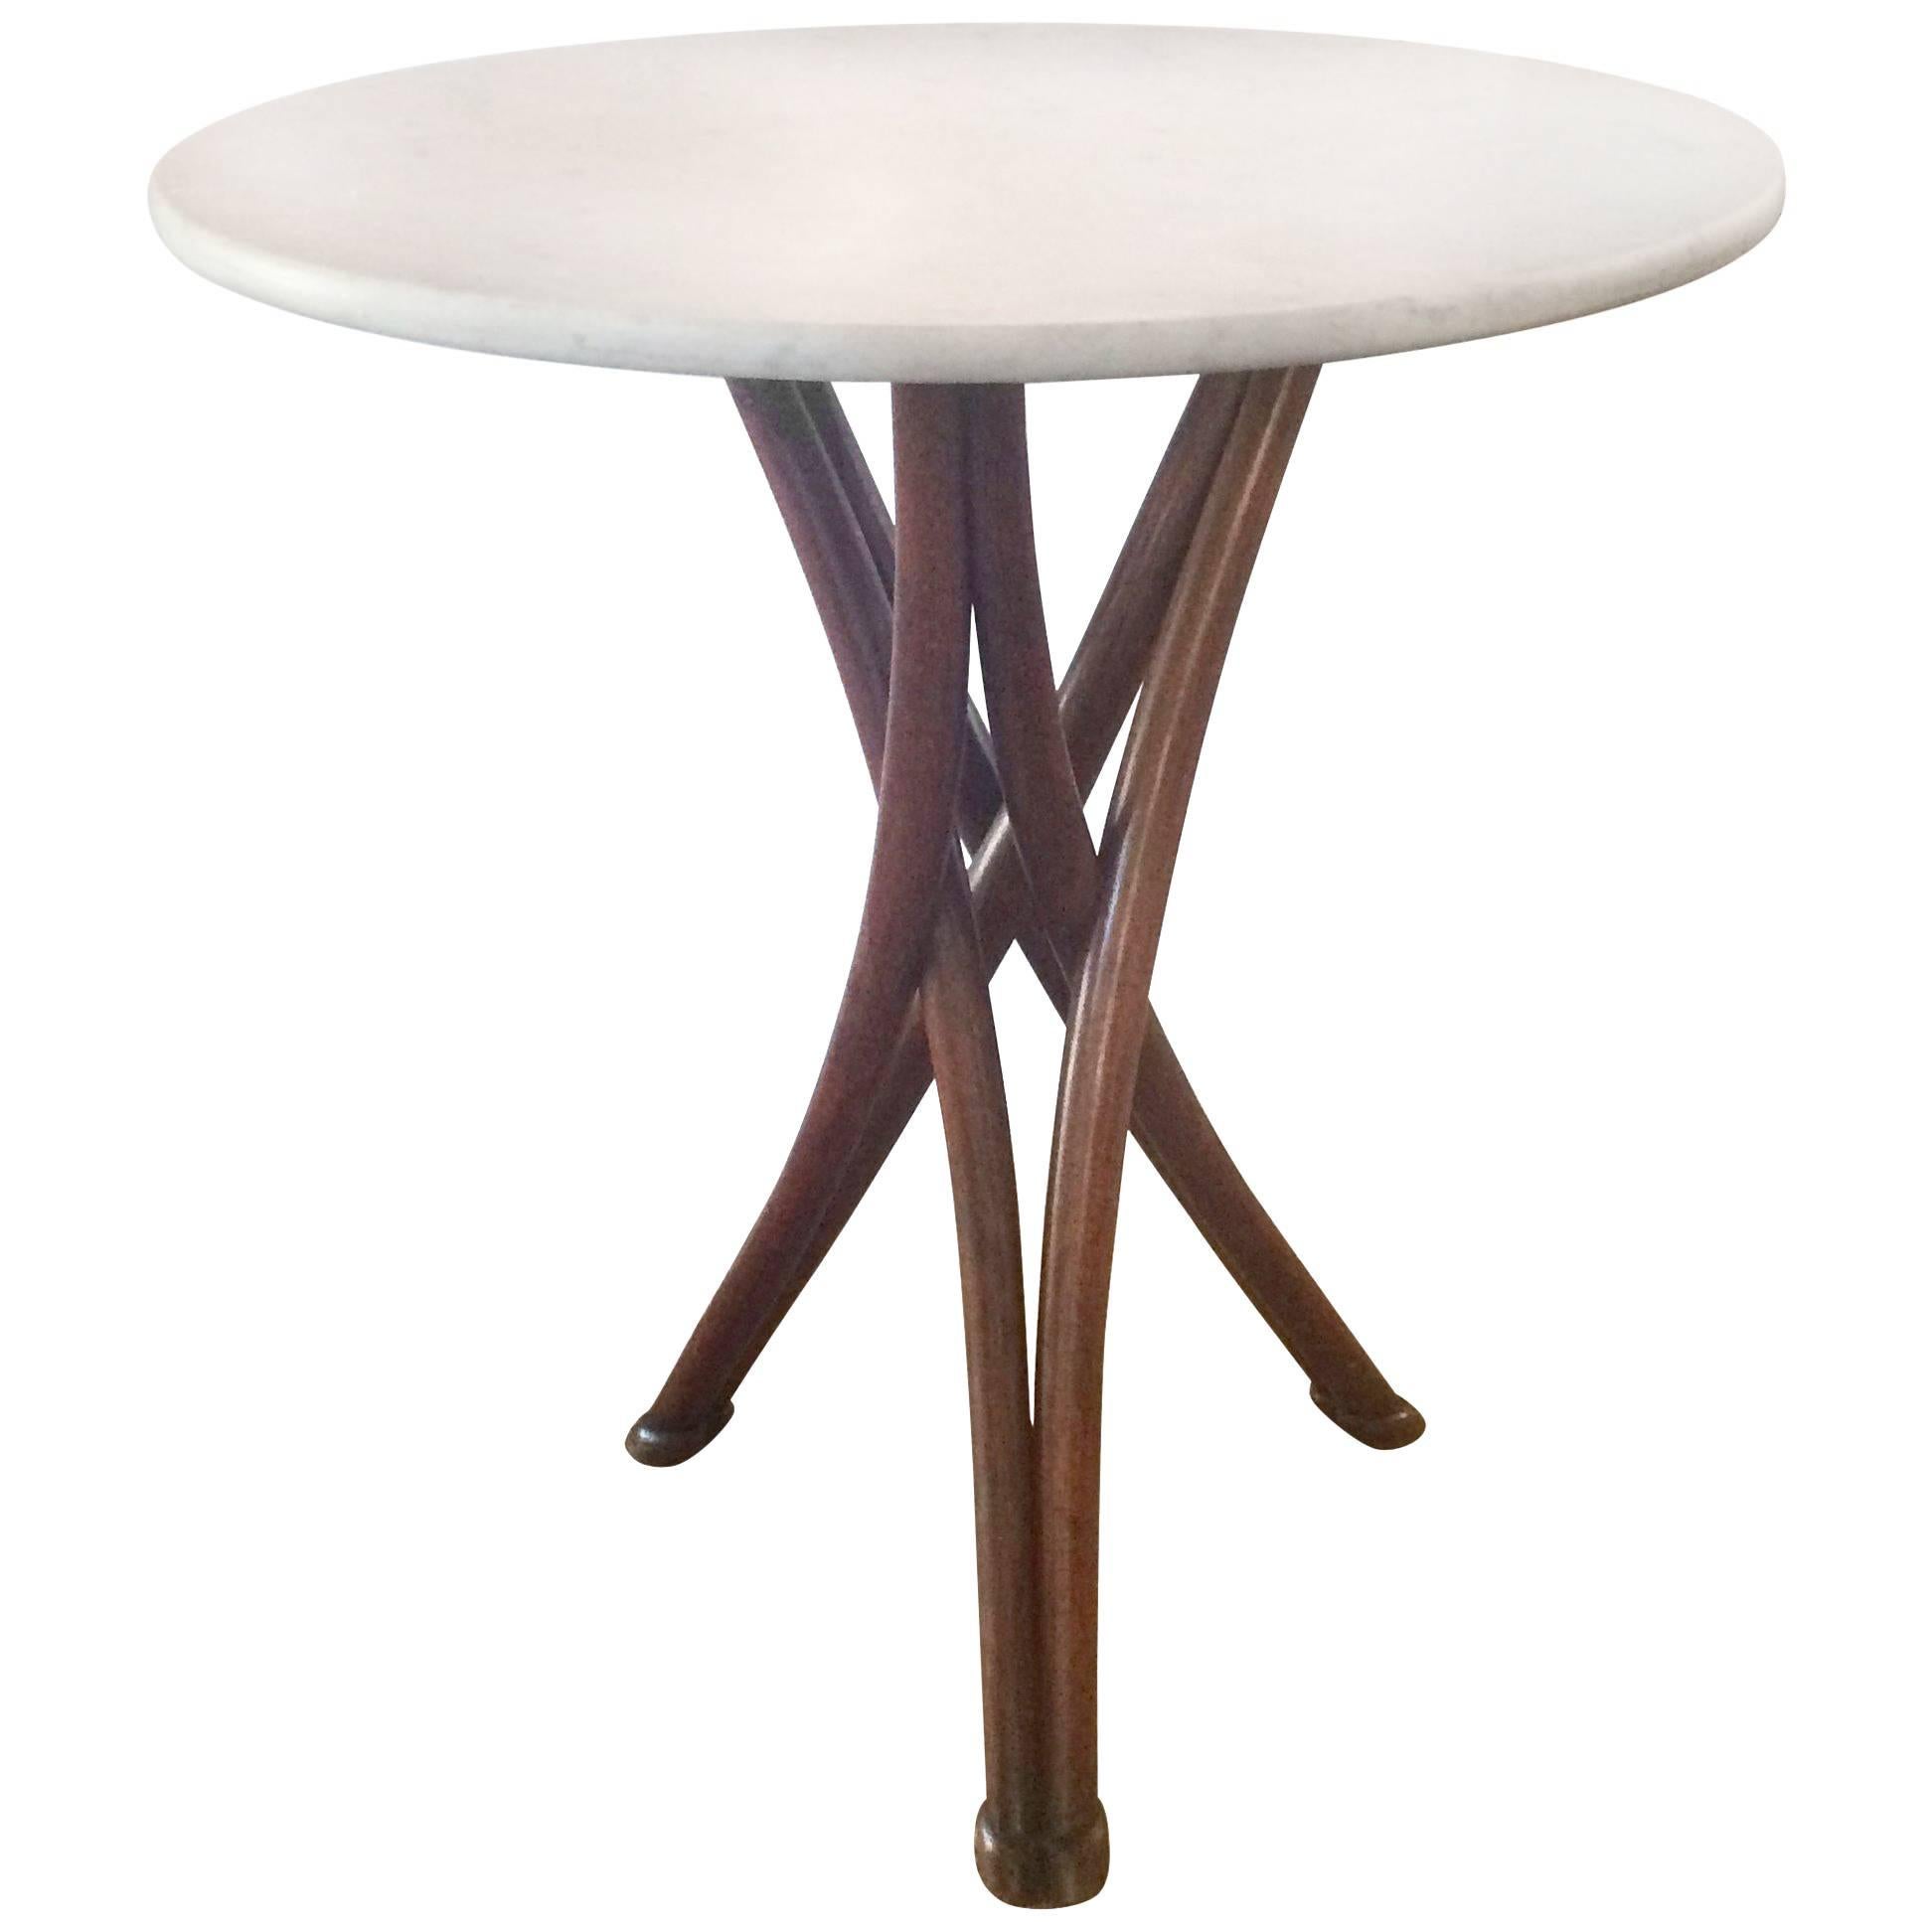 19th Century Thonet Bentwood Table